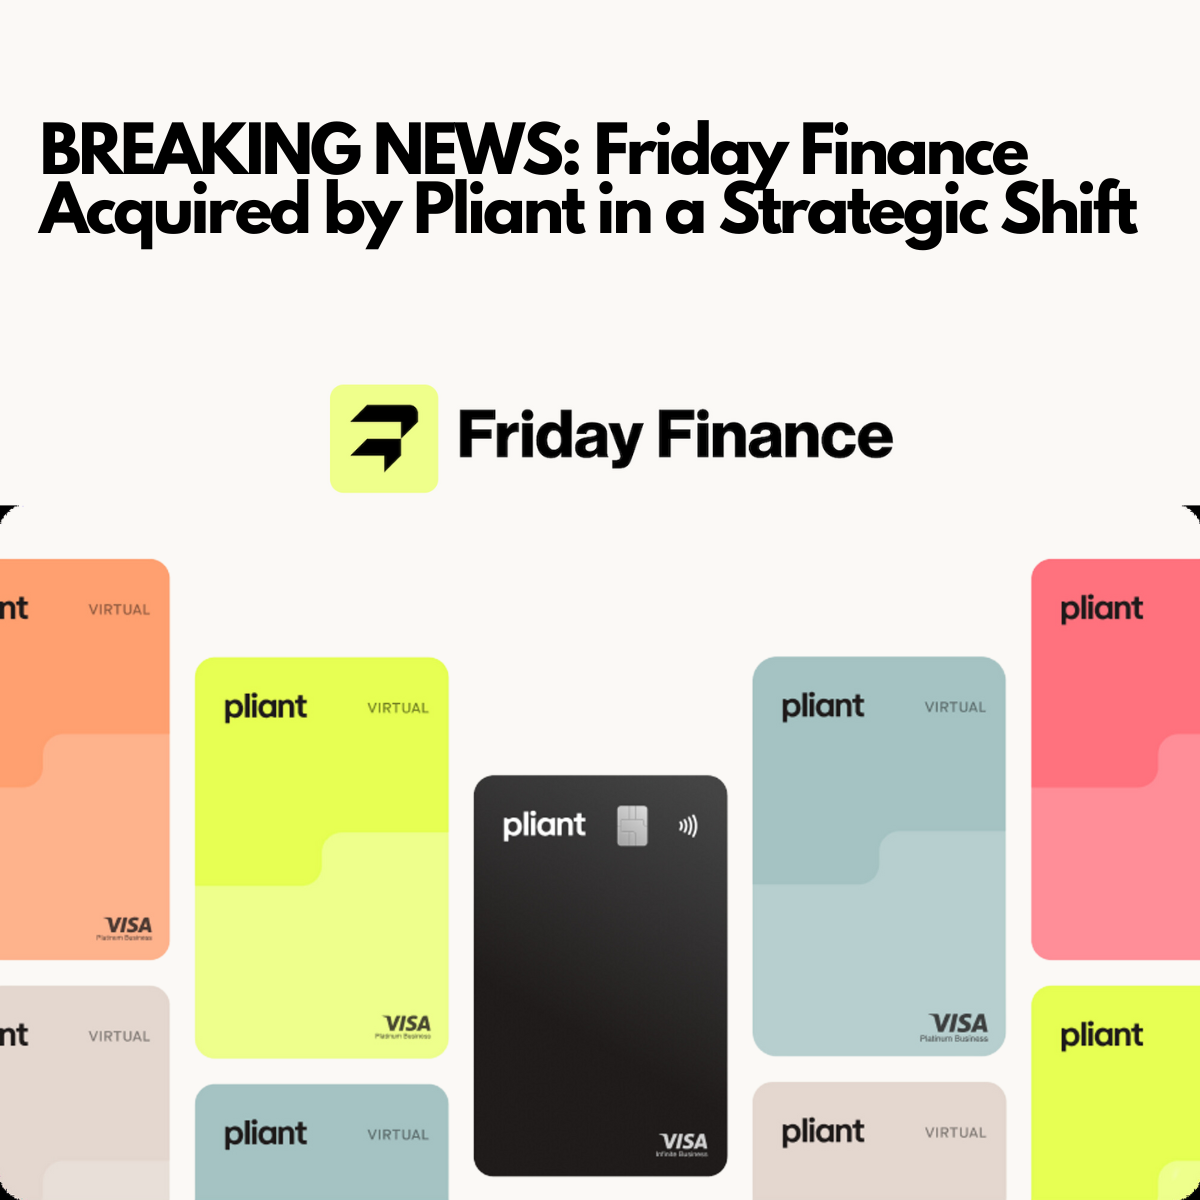 Friday Finance Acquired by Competitor Pliant in a Strategic Shift